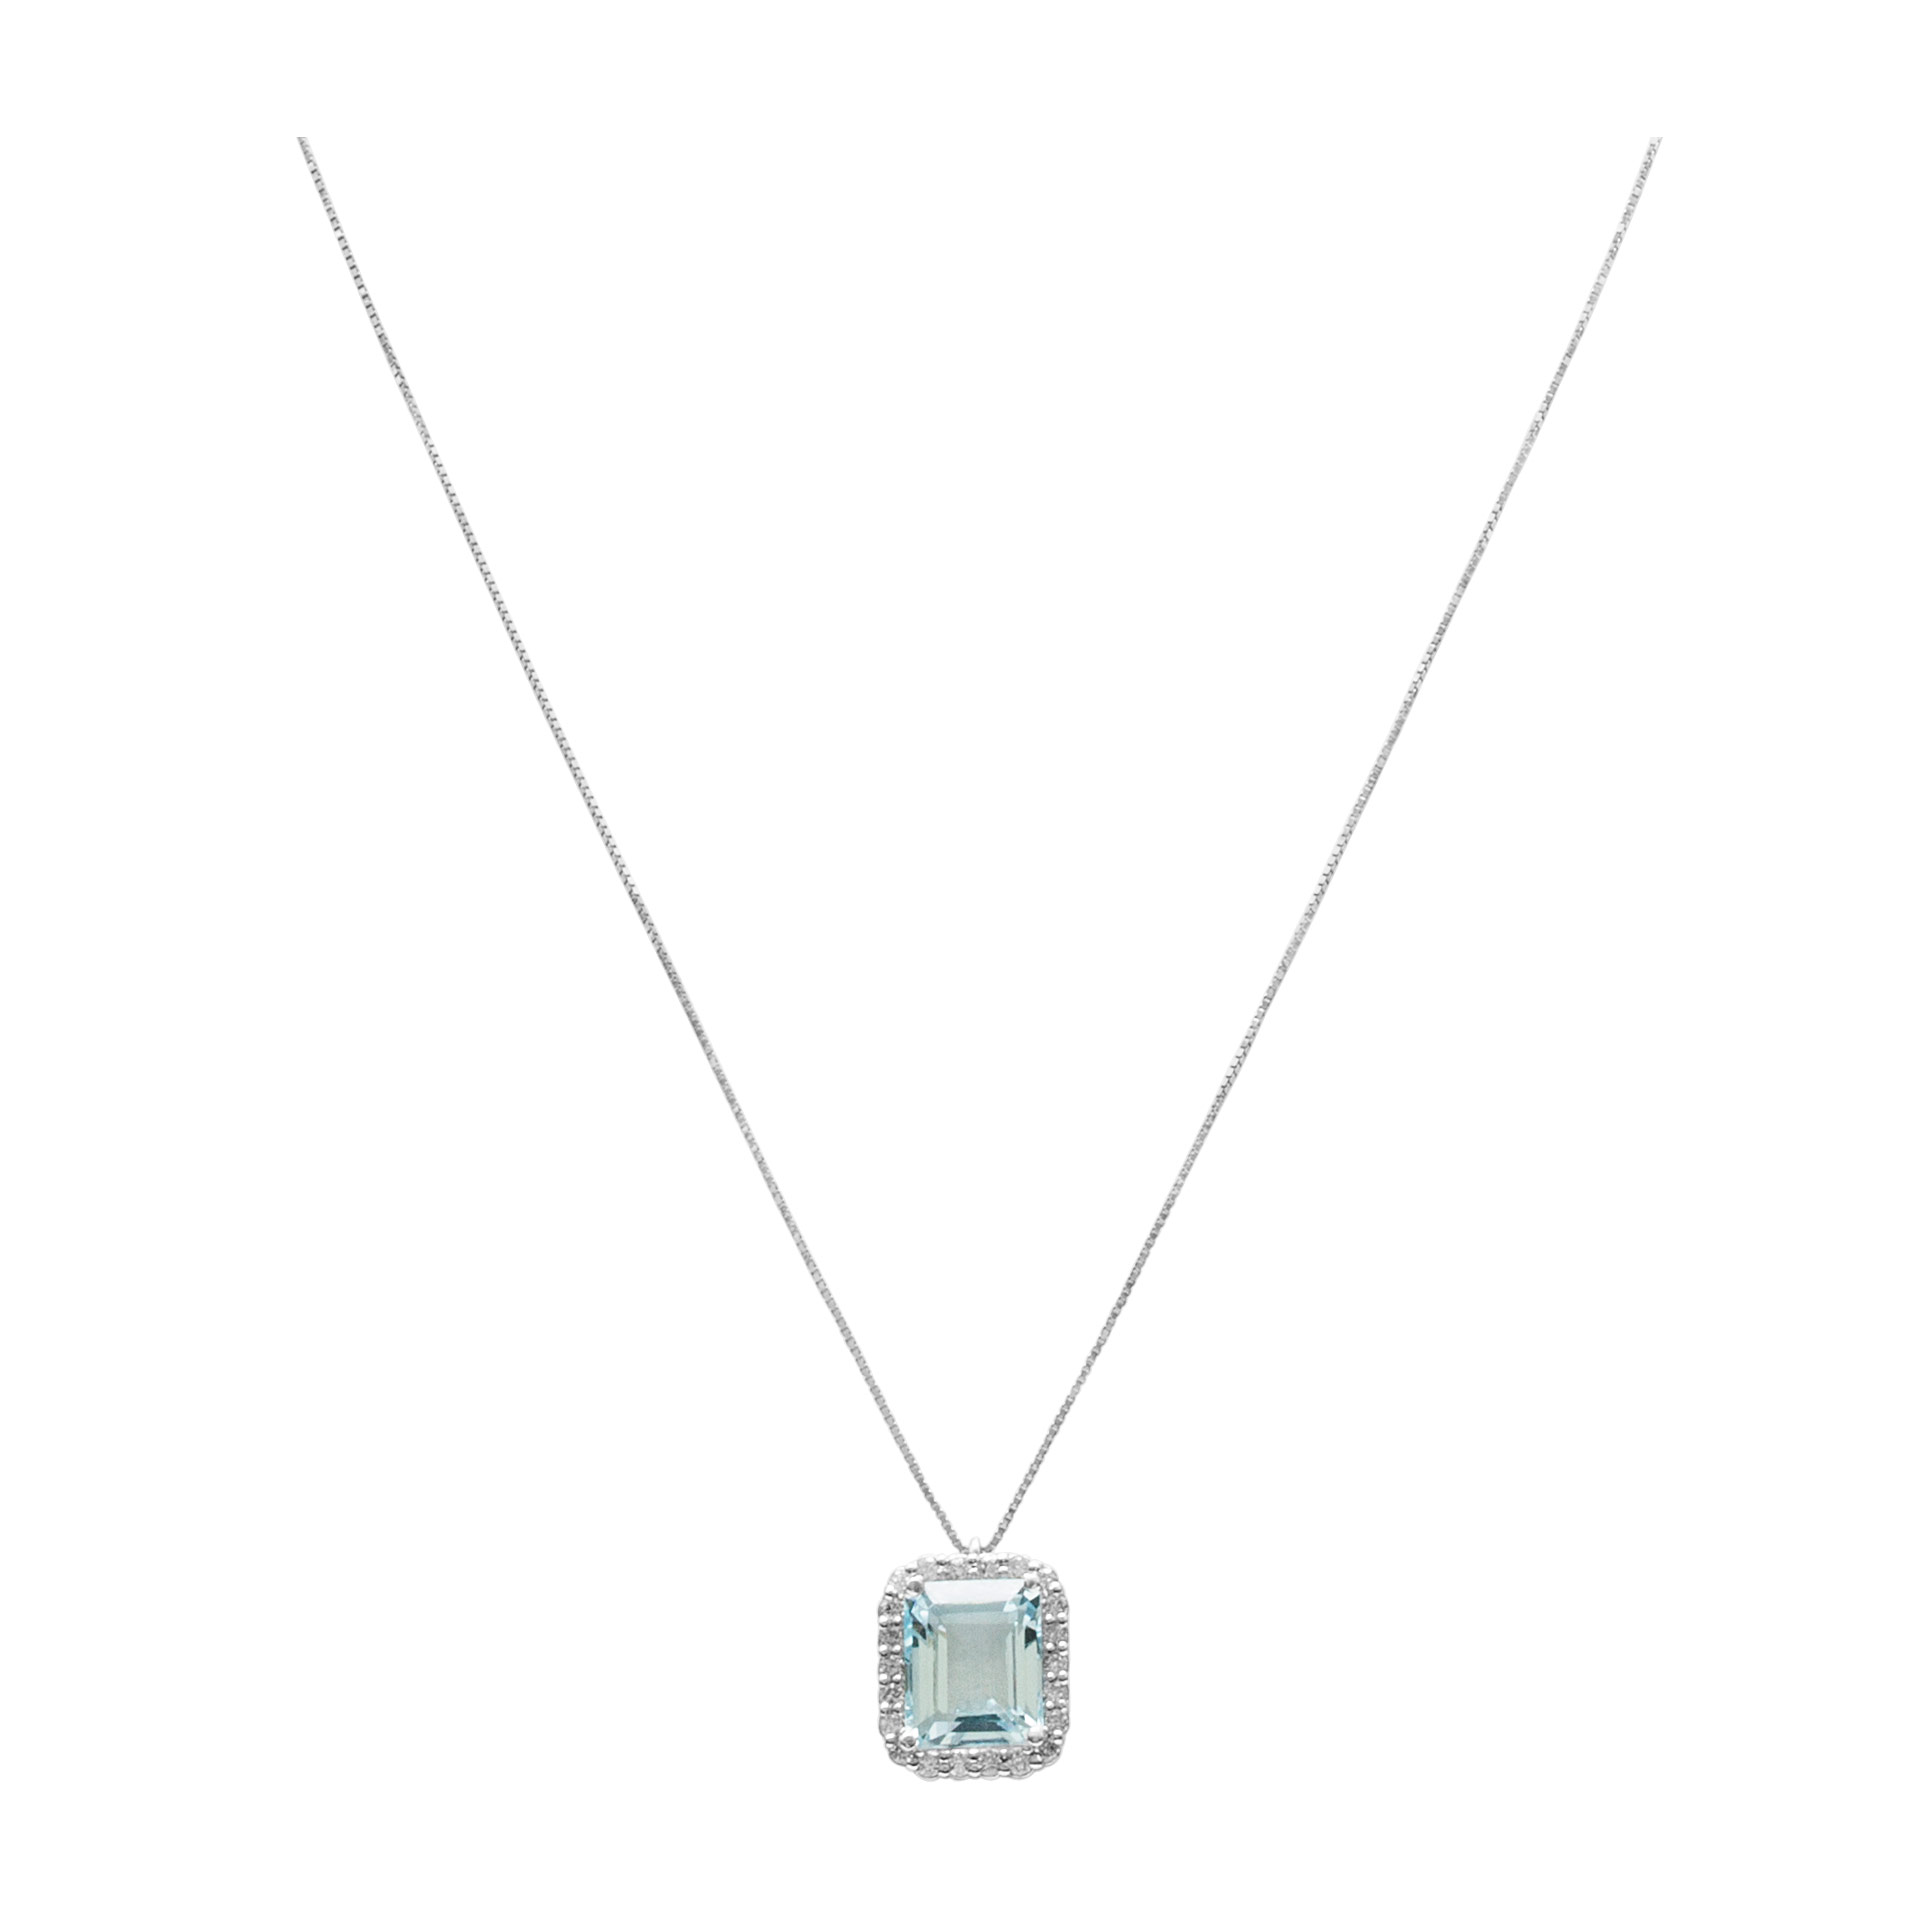 Aquamarine pendant with diamond accents 0.33 cts in 18k w/g image 2